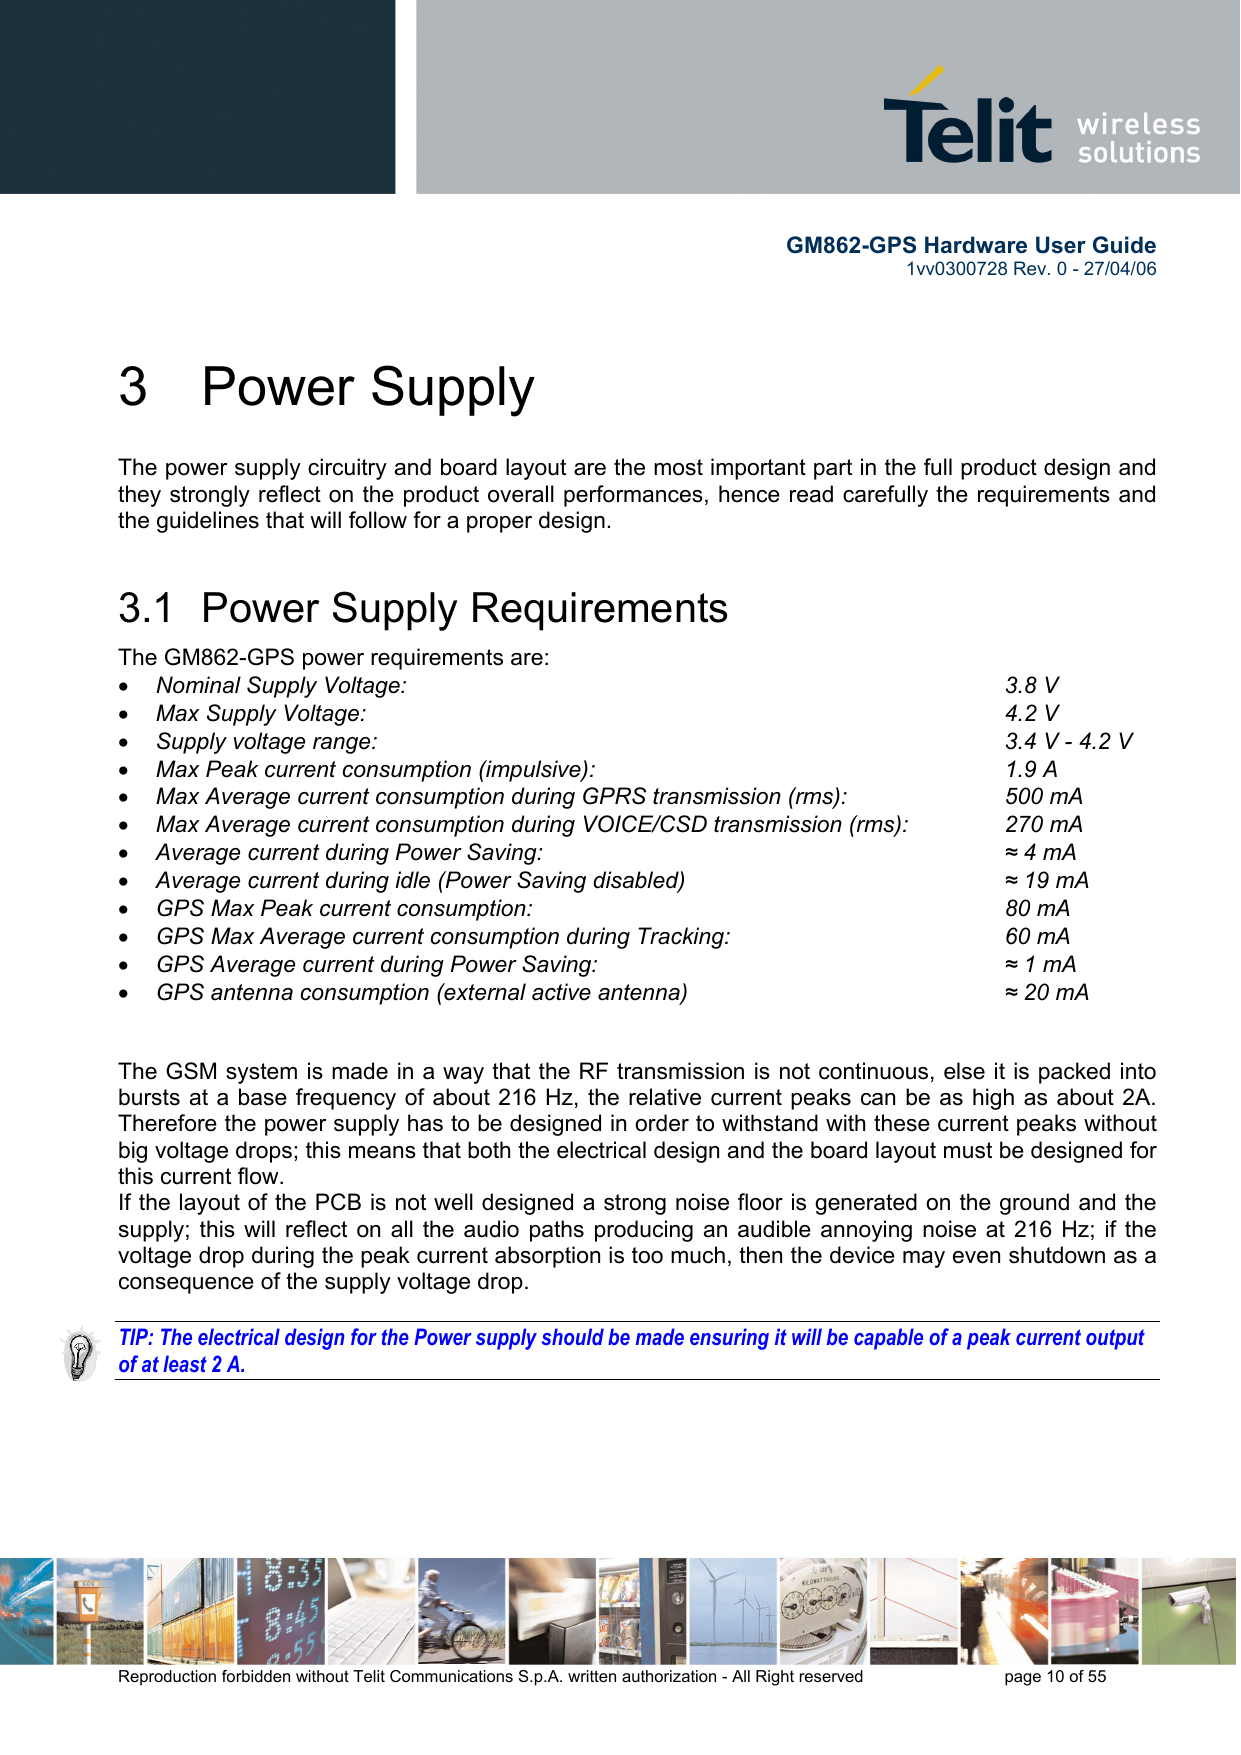        GM862-GPS Hardware User Guide   1vv0300728 Rev. 0 - 27/04/06    Reproduction forbidden without Telit Communications S.p.A. written authorization - All Right reserved    page 10 of 55  3 Power Supply The power supply circuitry and board layout are the most important part in the full product design and they strongly reflect on the product overall performances, hence read carefully the requirements and the guidelines that will follow for a proper design. 3.1  Power Supply Requirements The GM862-GPS power requirements are:  •  Nominal Supply Voltage:       3.8 V •  Max Supply Voltage:        4.2 V •  Supply voltage range:                     3.4 V - 4.2 V •  Max Peak current consumption (impulsive):           1.9 A •  Max Average current consumption during GPRS transmission (rms):    500 mA •  Max Average current consumption during VOICE/CSD transmission (rms):   270 mA •  Average current during Power Saving:             ≈ 4 mA •  Average current during idle (Power Saving disabled)        ≈ 19 mA •  GPS Max Peak current consumption:       80 mA •  GPS Max Average current consumption during Tracking:       60 mA •  GPS Average current during Power Saving:           ≈ 1 mA •  GPS antenna consumption (external active antenna)        ≈ 20 mA   The GSM system is made in a way that the RF transmission is not continuous, else it is packed into bursts at a base frequency of about 216 Hz, the relative current peaks can be as high as about 2A. Therefore the power supply has to be designed in order to withstand with these current peaks without big voltage drops; this means that both the electrical design and the board layout must be designed for this current flow. If the layout of the PCB is not well designed a strong noise floor is generated on the ground and the supply; this will reflect on all the audio paths producing an audible annoying noise at 216 Hz; if the voltage drop during the peak current absorption is too much, then the device may even shutdown as a consequence of the supply voltage drop.  TIP: The electrical design for the Power supply should be made ensuring it will be capable of a peak current output of at least 2 A.  